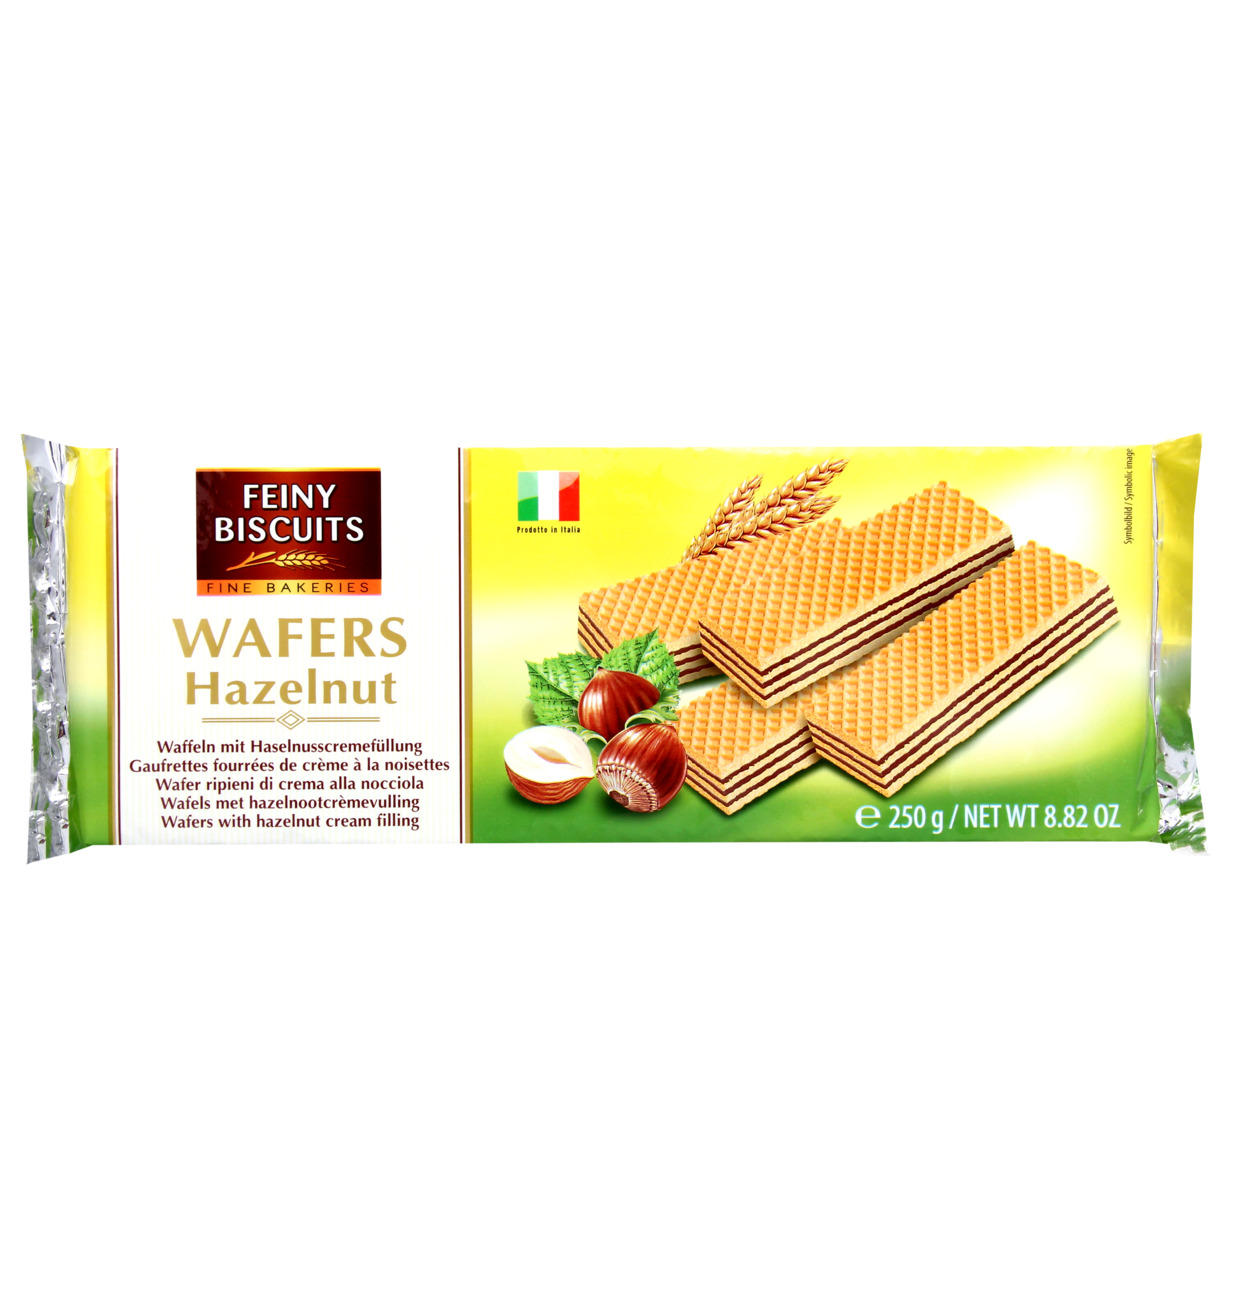 Feiny Biscuits &#1042;&#1072;&#1092;&#1083;&#1080; &#1089; &#1086;&#1088;&#1077;&#1093;&#1086;&#1074;&#1086;&#1081; &#1085;&#1072;&#1095;&#1080;&#1085;&#1082;&#1086;&#1081; 250 &#1075;

